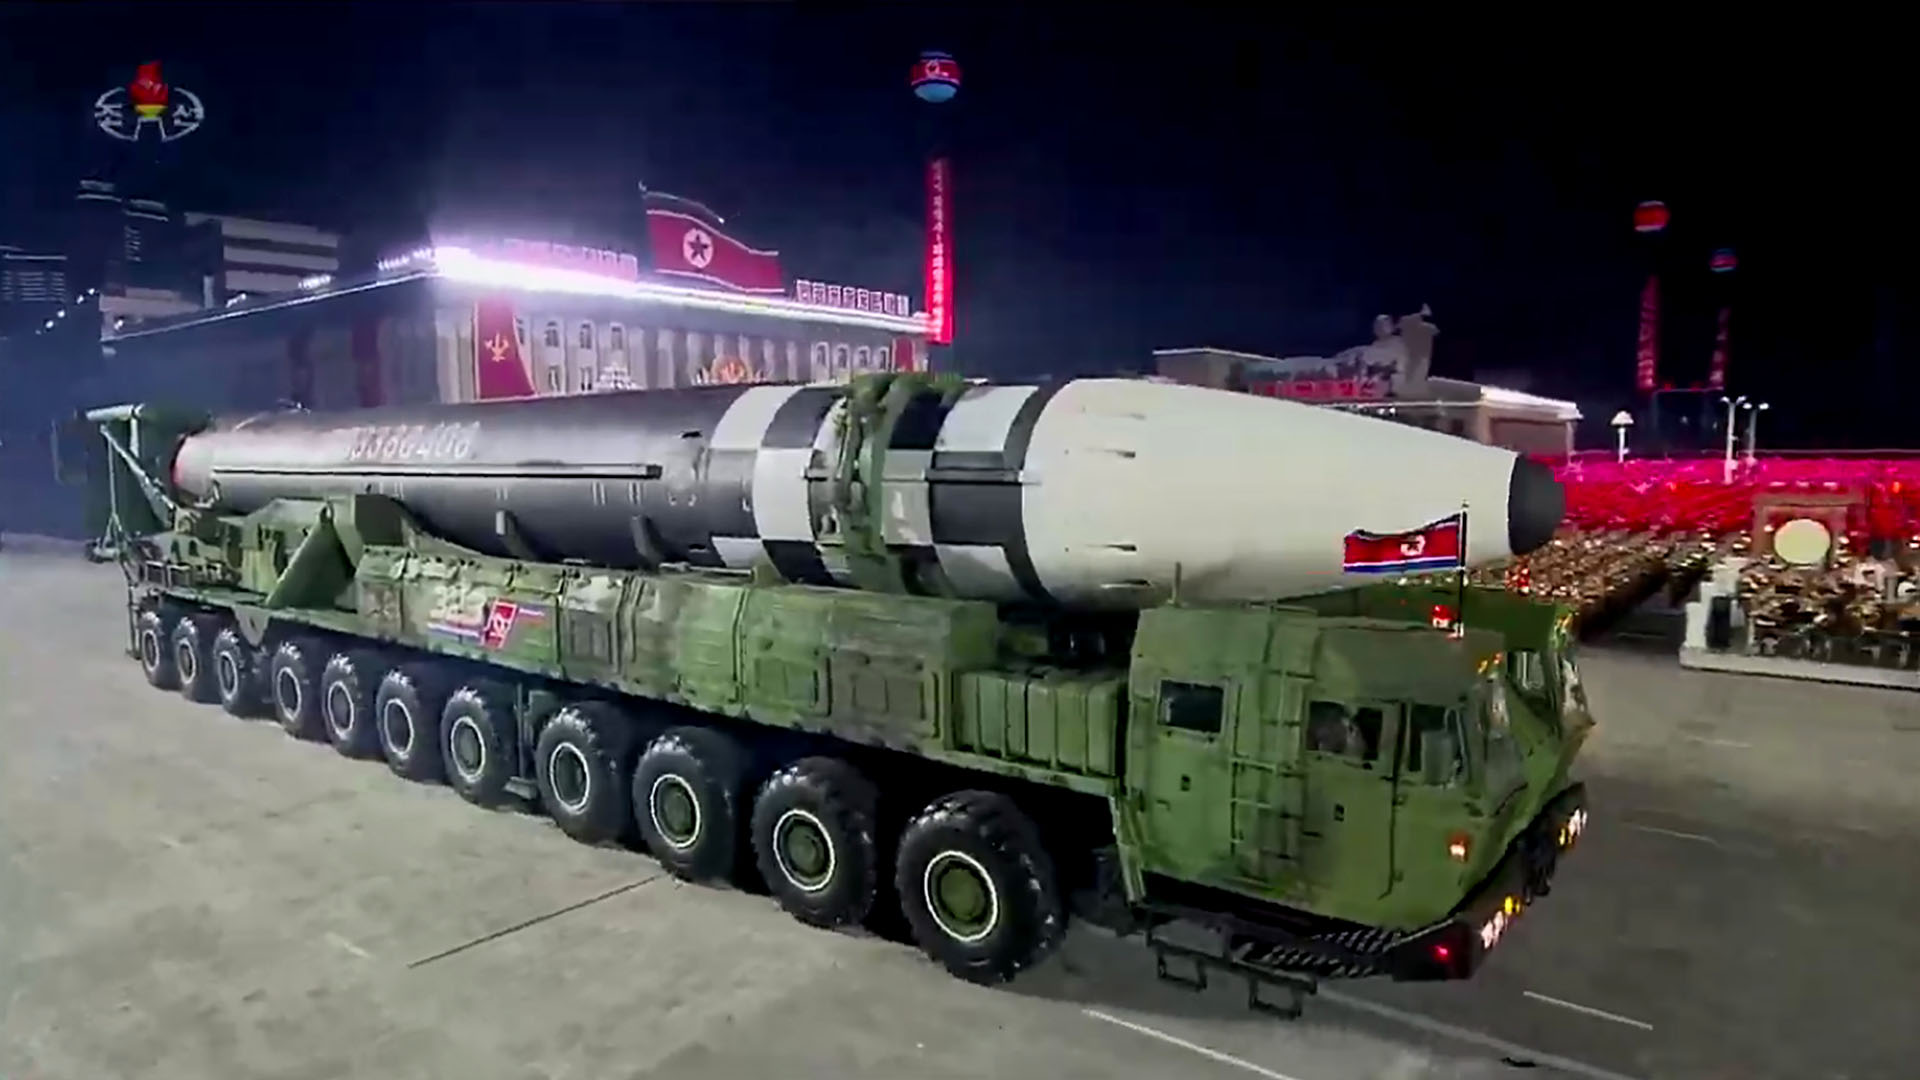 North Korea fires an intercontinental ballistic missile, according to Seoul